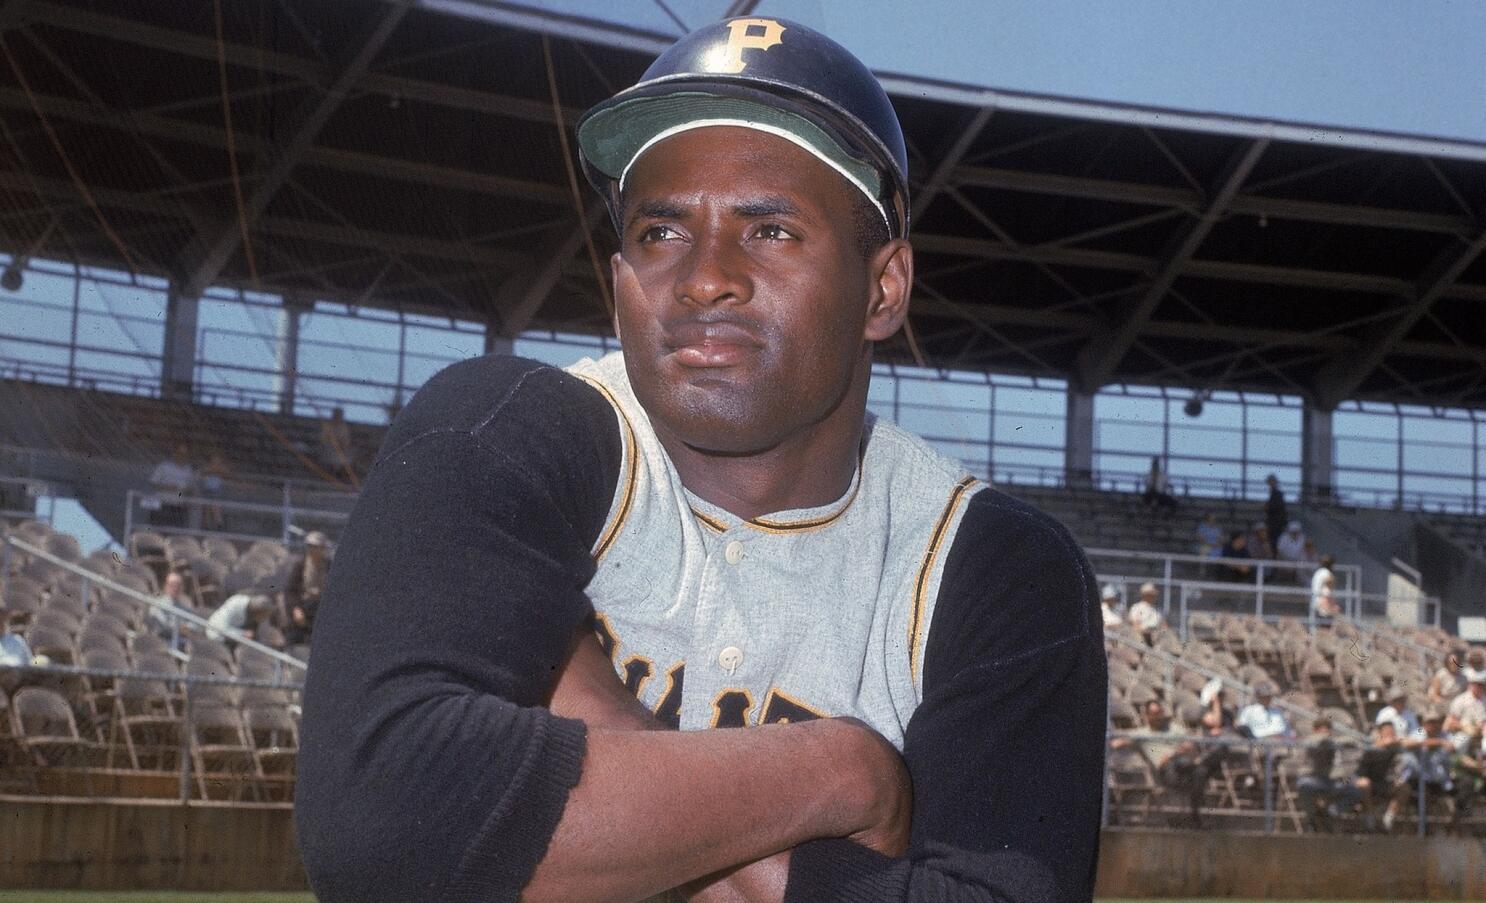 Afro-Boricua baseball star Roberto Clemente brings CT communities together  decades after his death